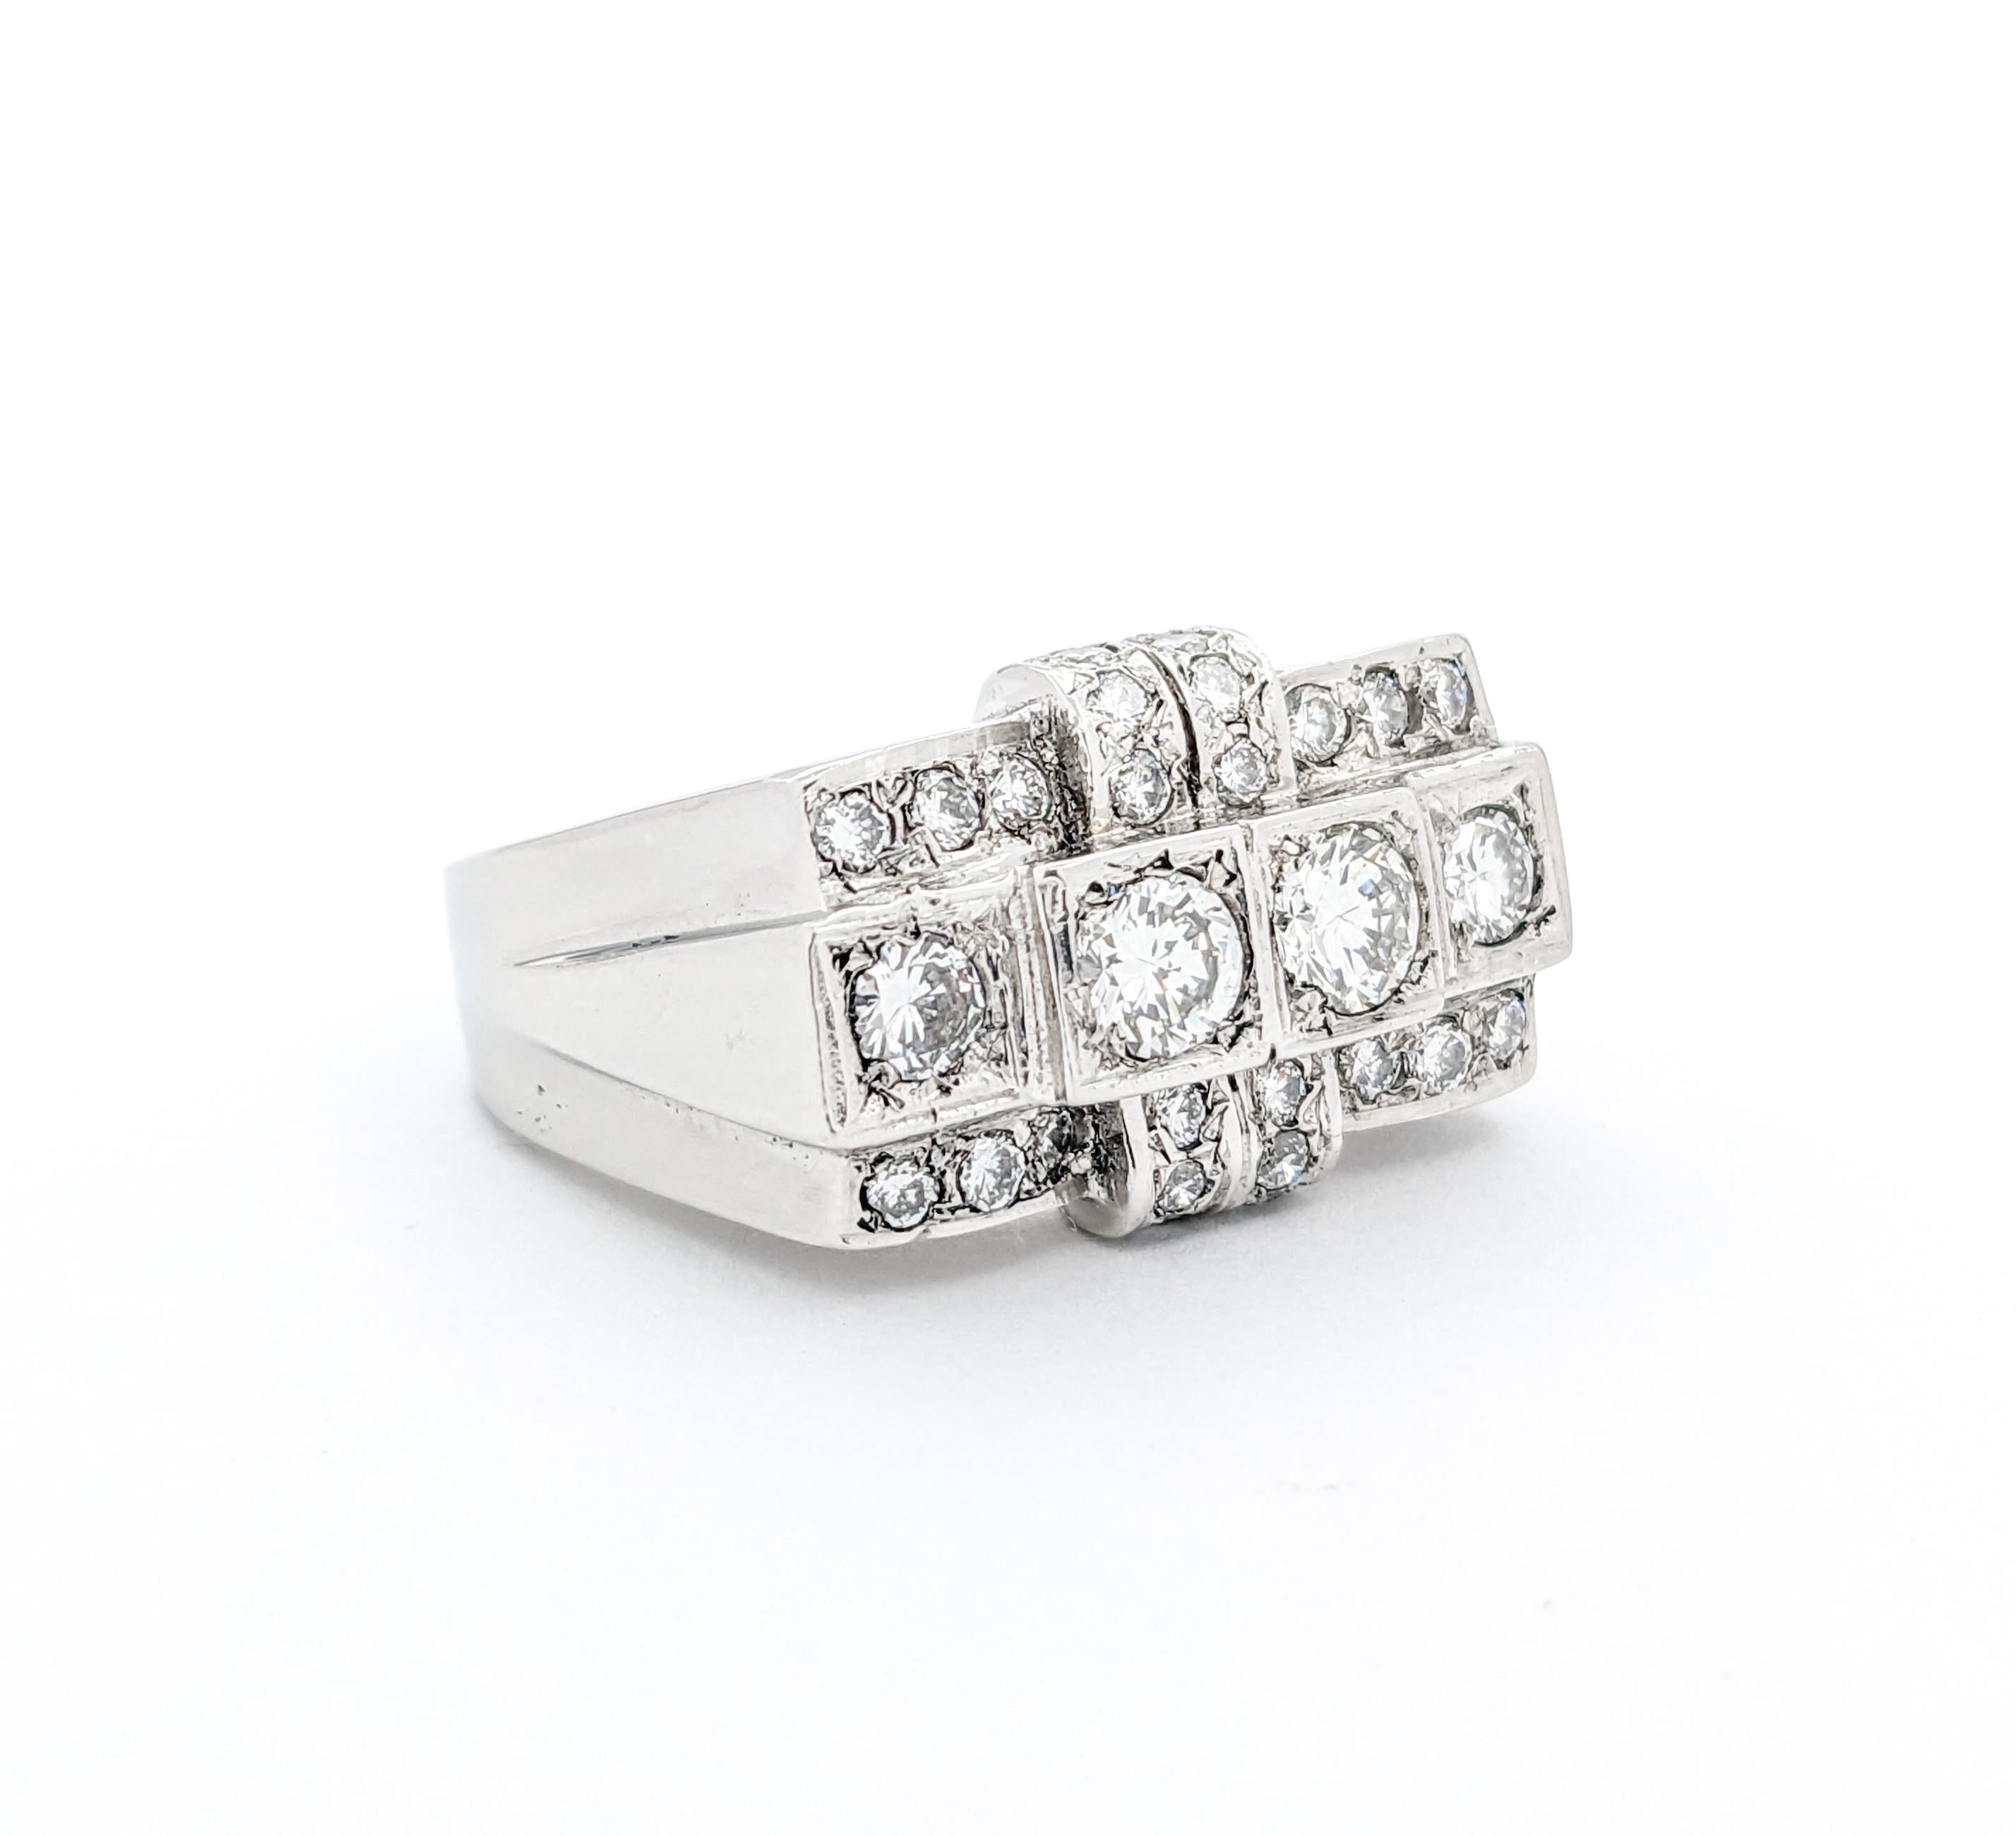 Vintage 3ctw Diamond Ring In Platinum In Excellent Condition For Sale In Bloomington, MN